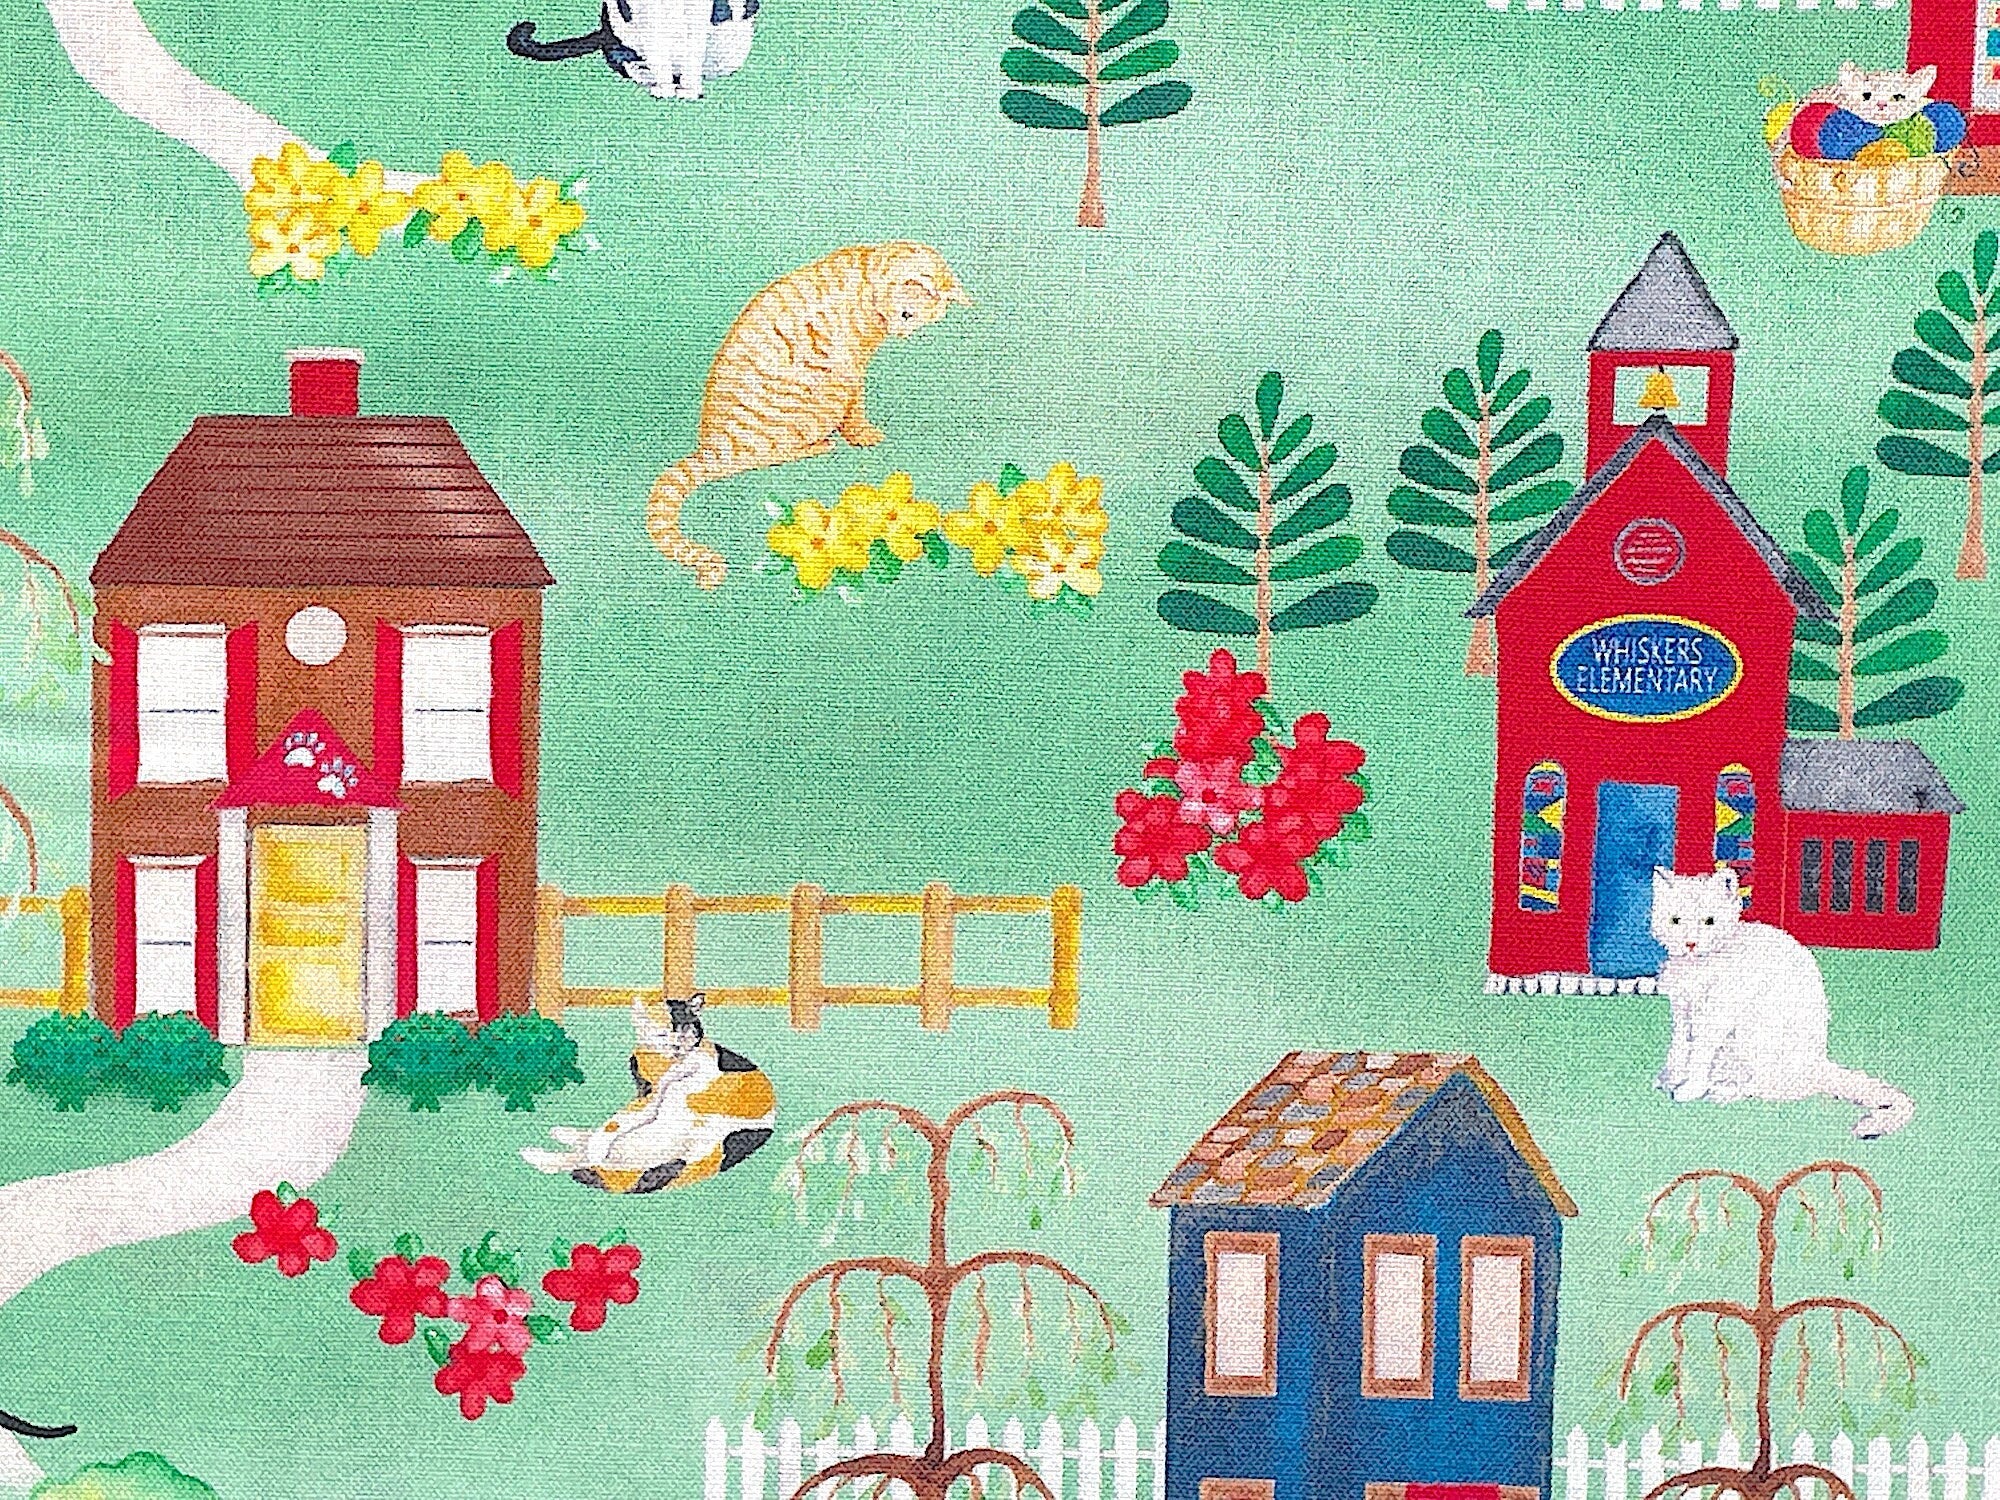 Close up of cats, buildings, trees and more.